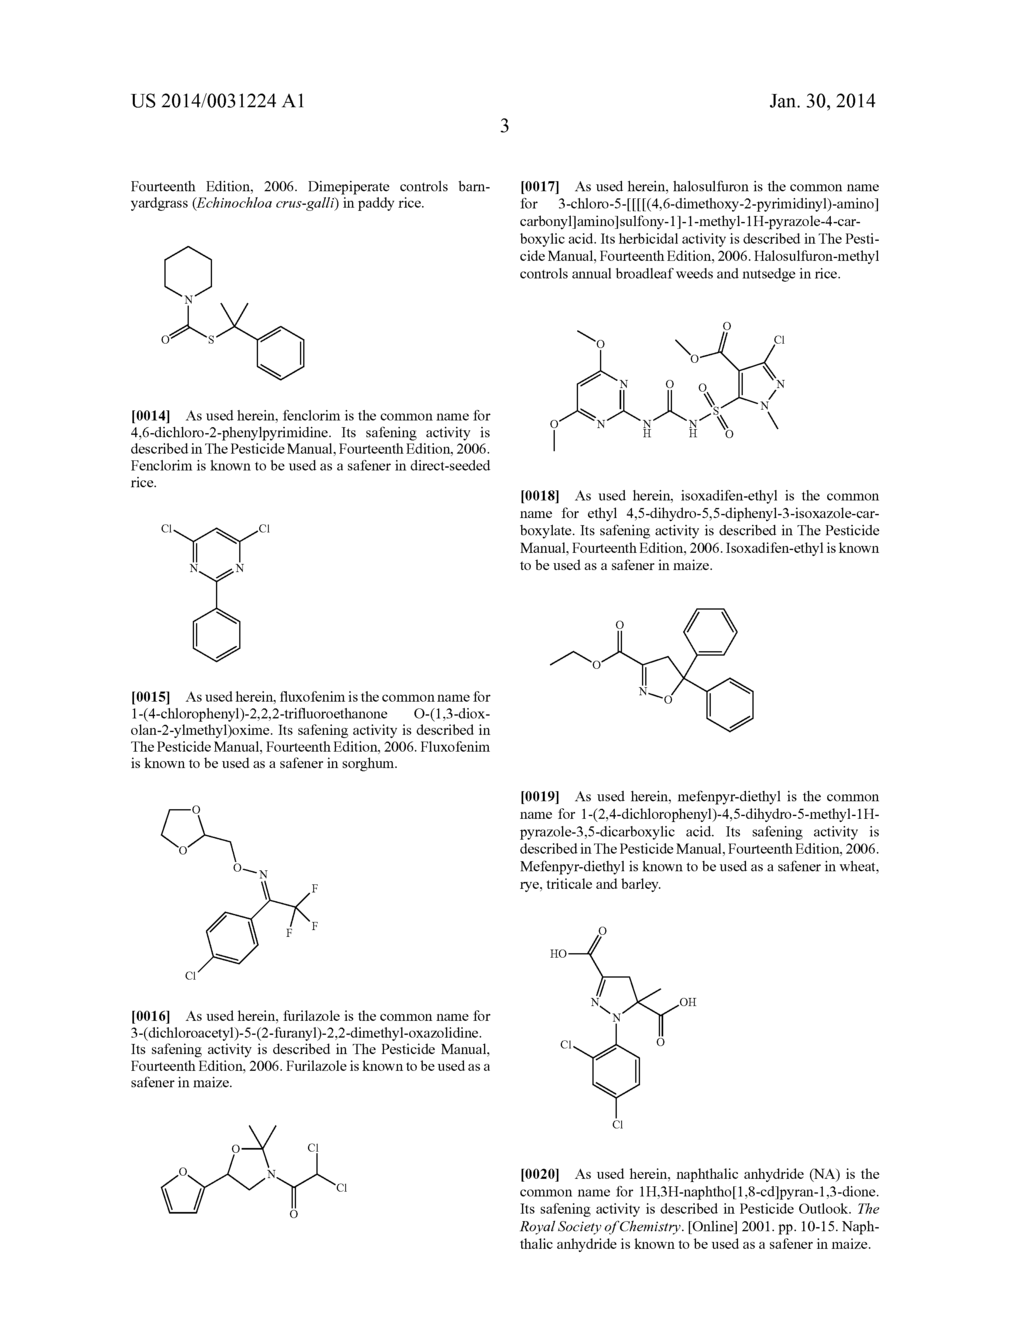 SAFENED HERBICIDAL COMPOSITIONS INCLUDING     4-AMINO-3-CHLORO-5-FLUORO-6-(4-CHLORO-2-FLUORO-3-METHOXYPHENYL)PYRIDINE-2-    -CARBOXYLIC ACID OR A DERIVATIVE THEREOF FOR USE IN RICE - diagram, schematic, and image 04